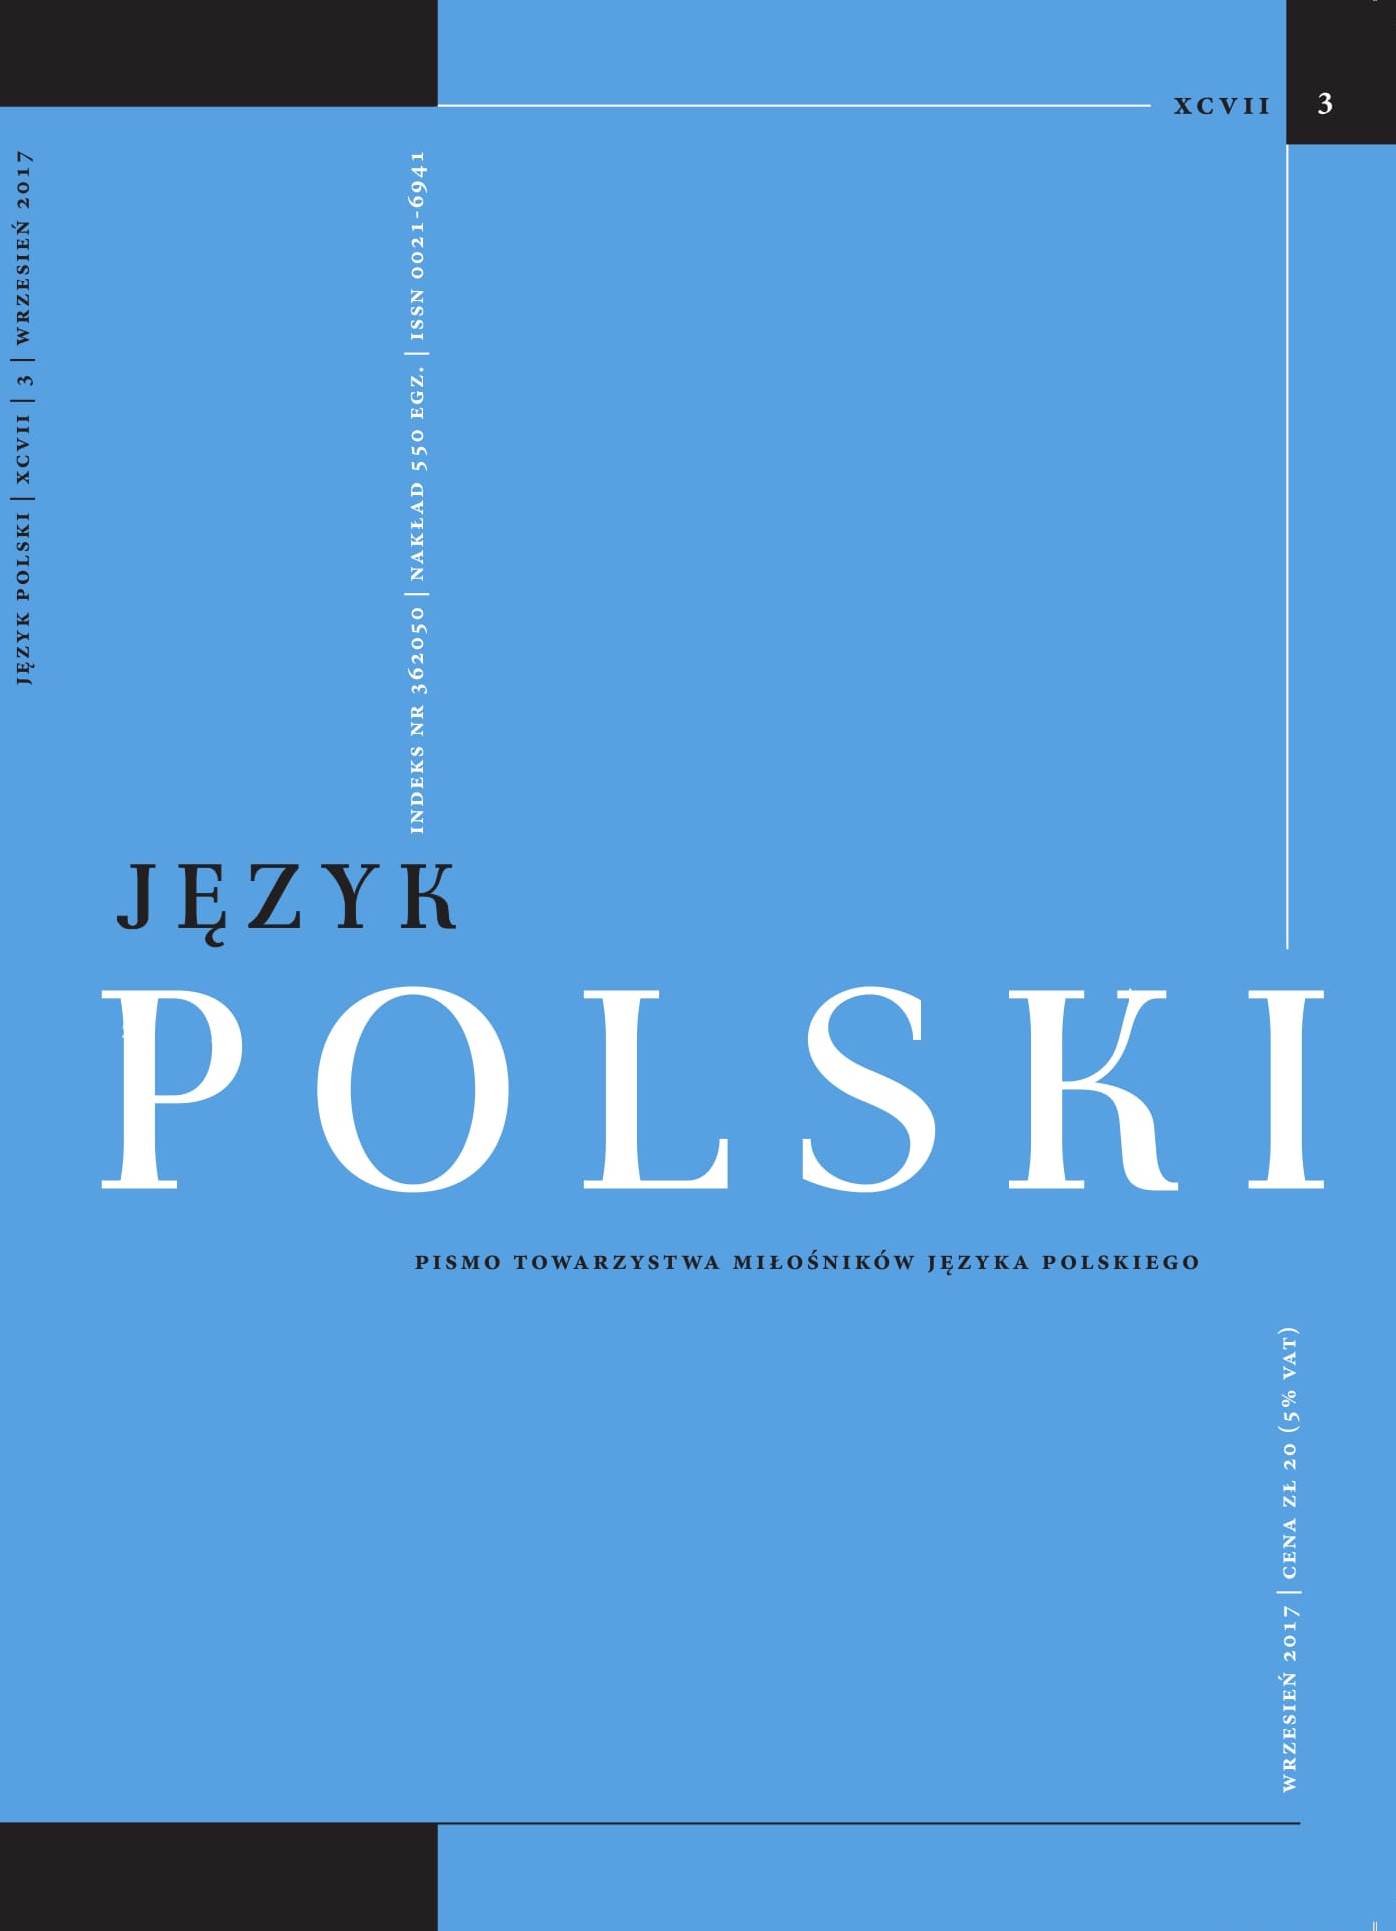 Polish (not only) for Poles. Students’ opinion on the position of the language in the world